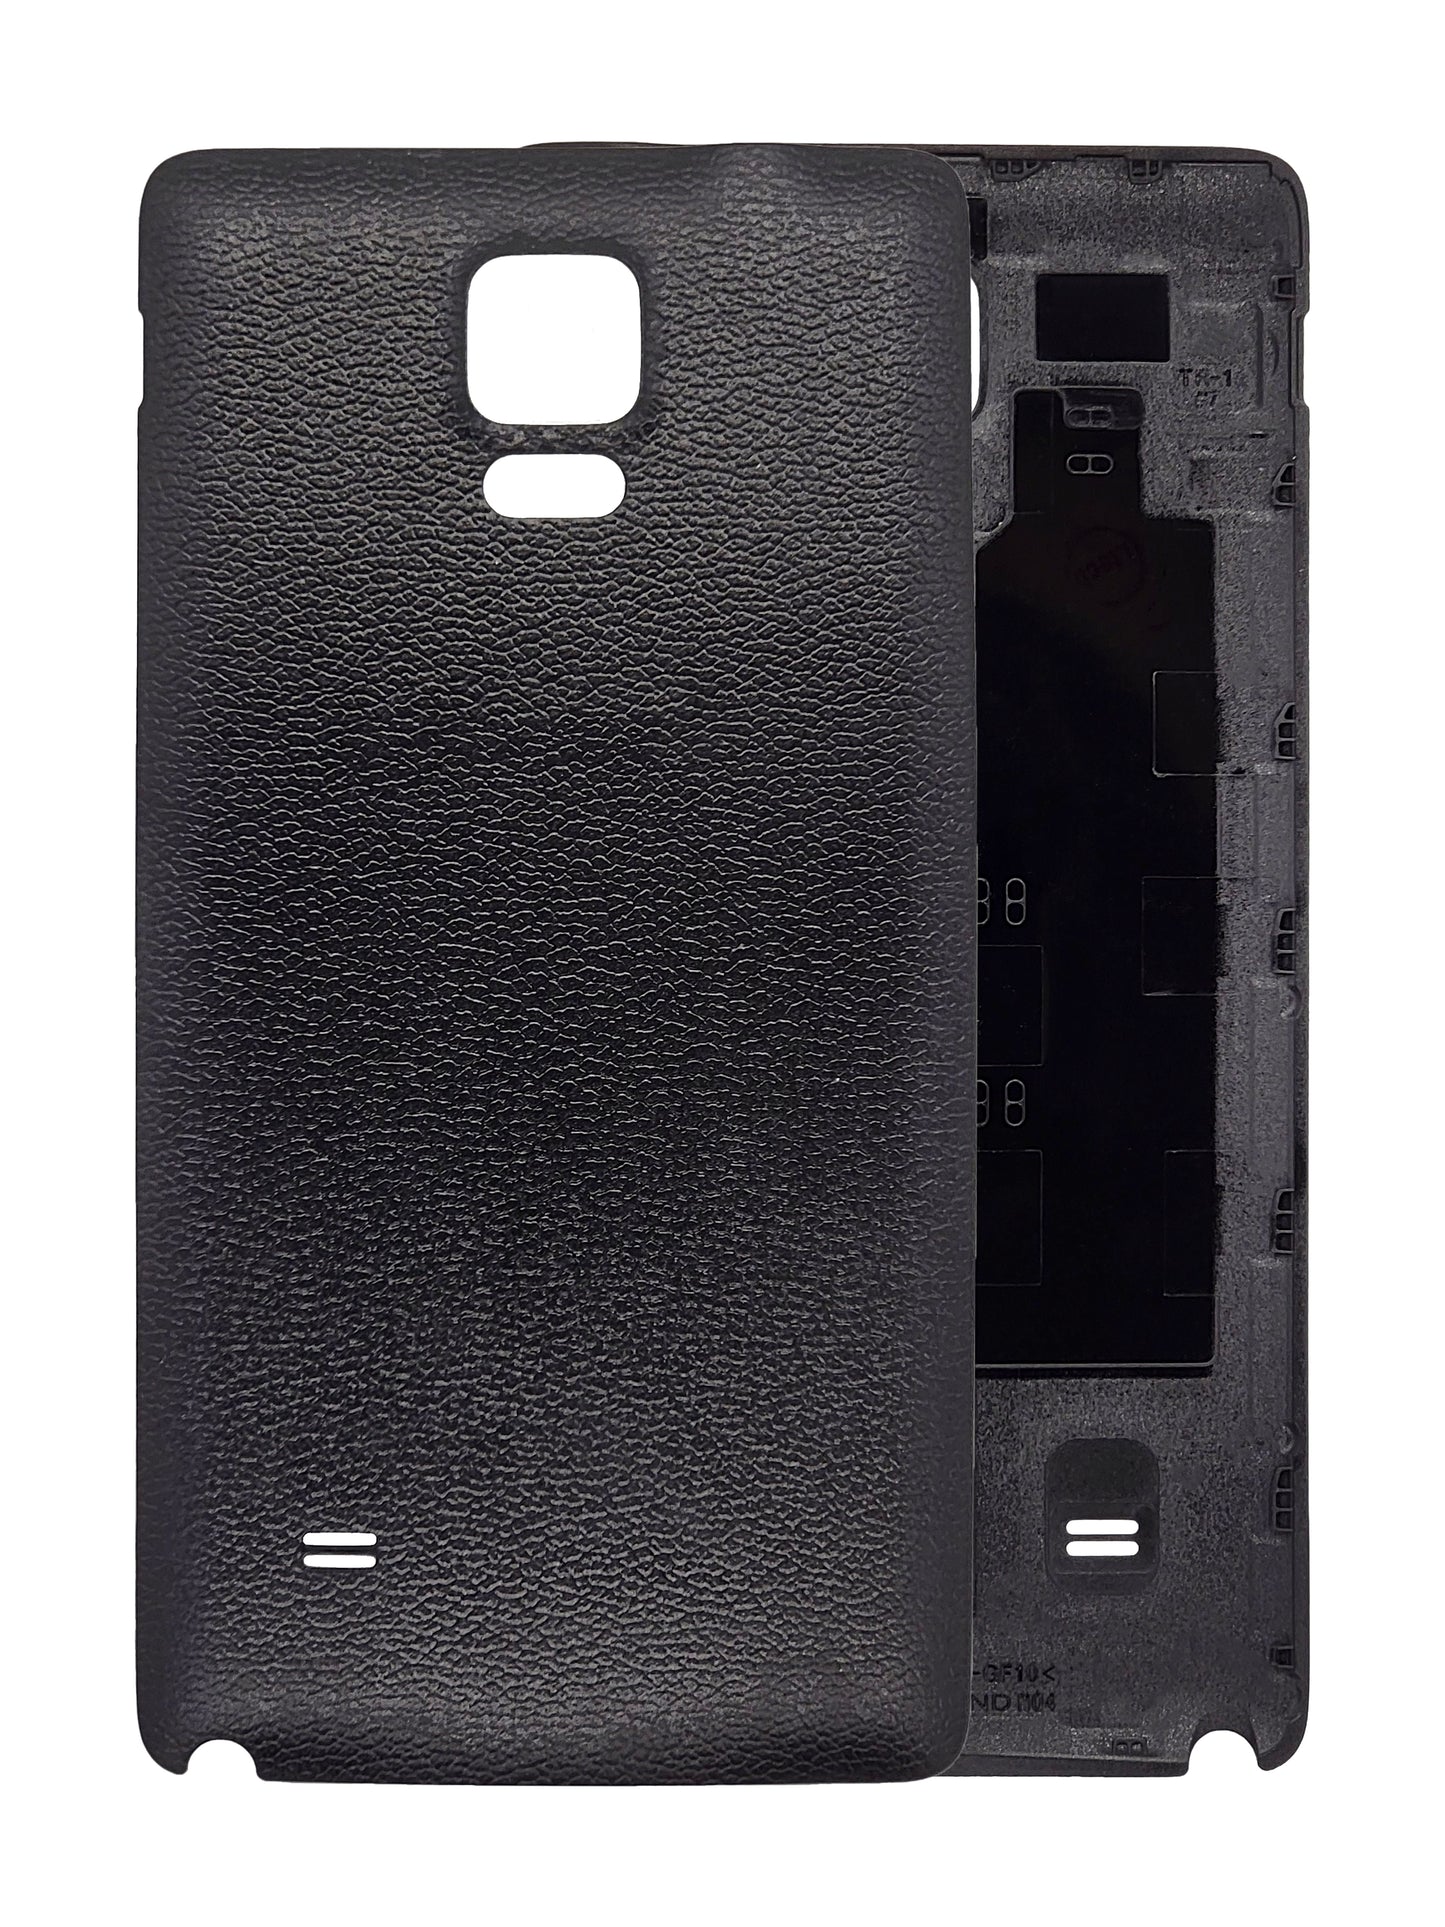 SGN Note 4 Back Cover (Black)